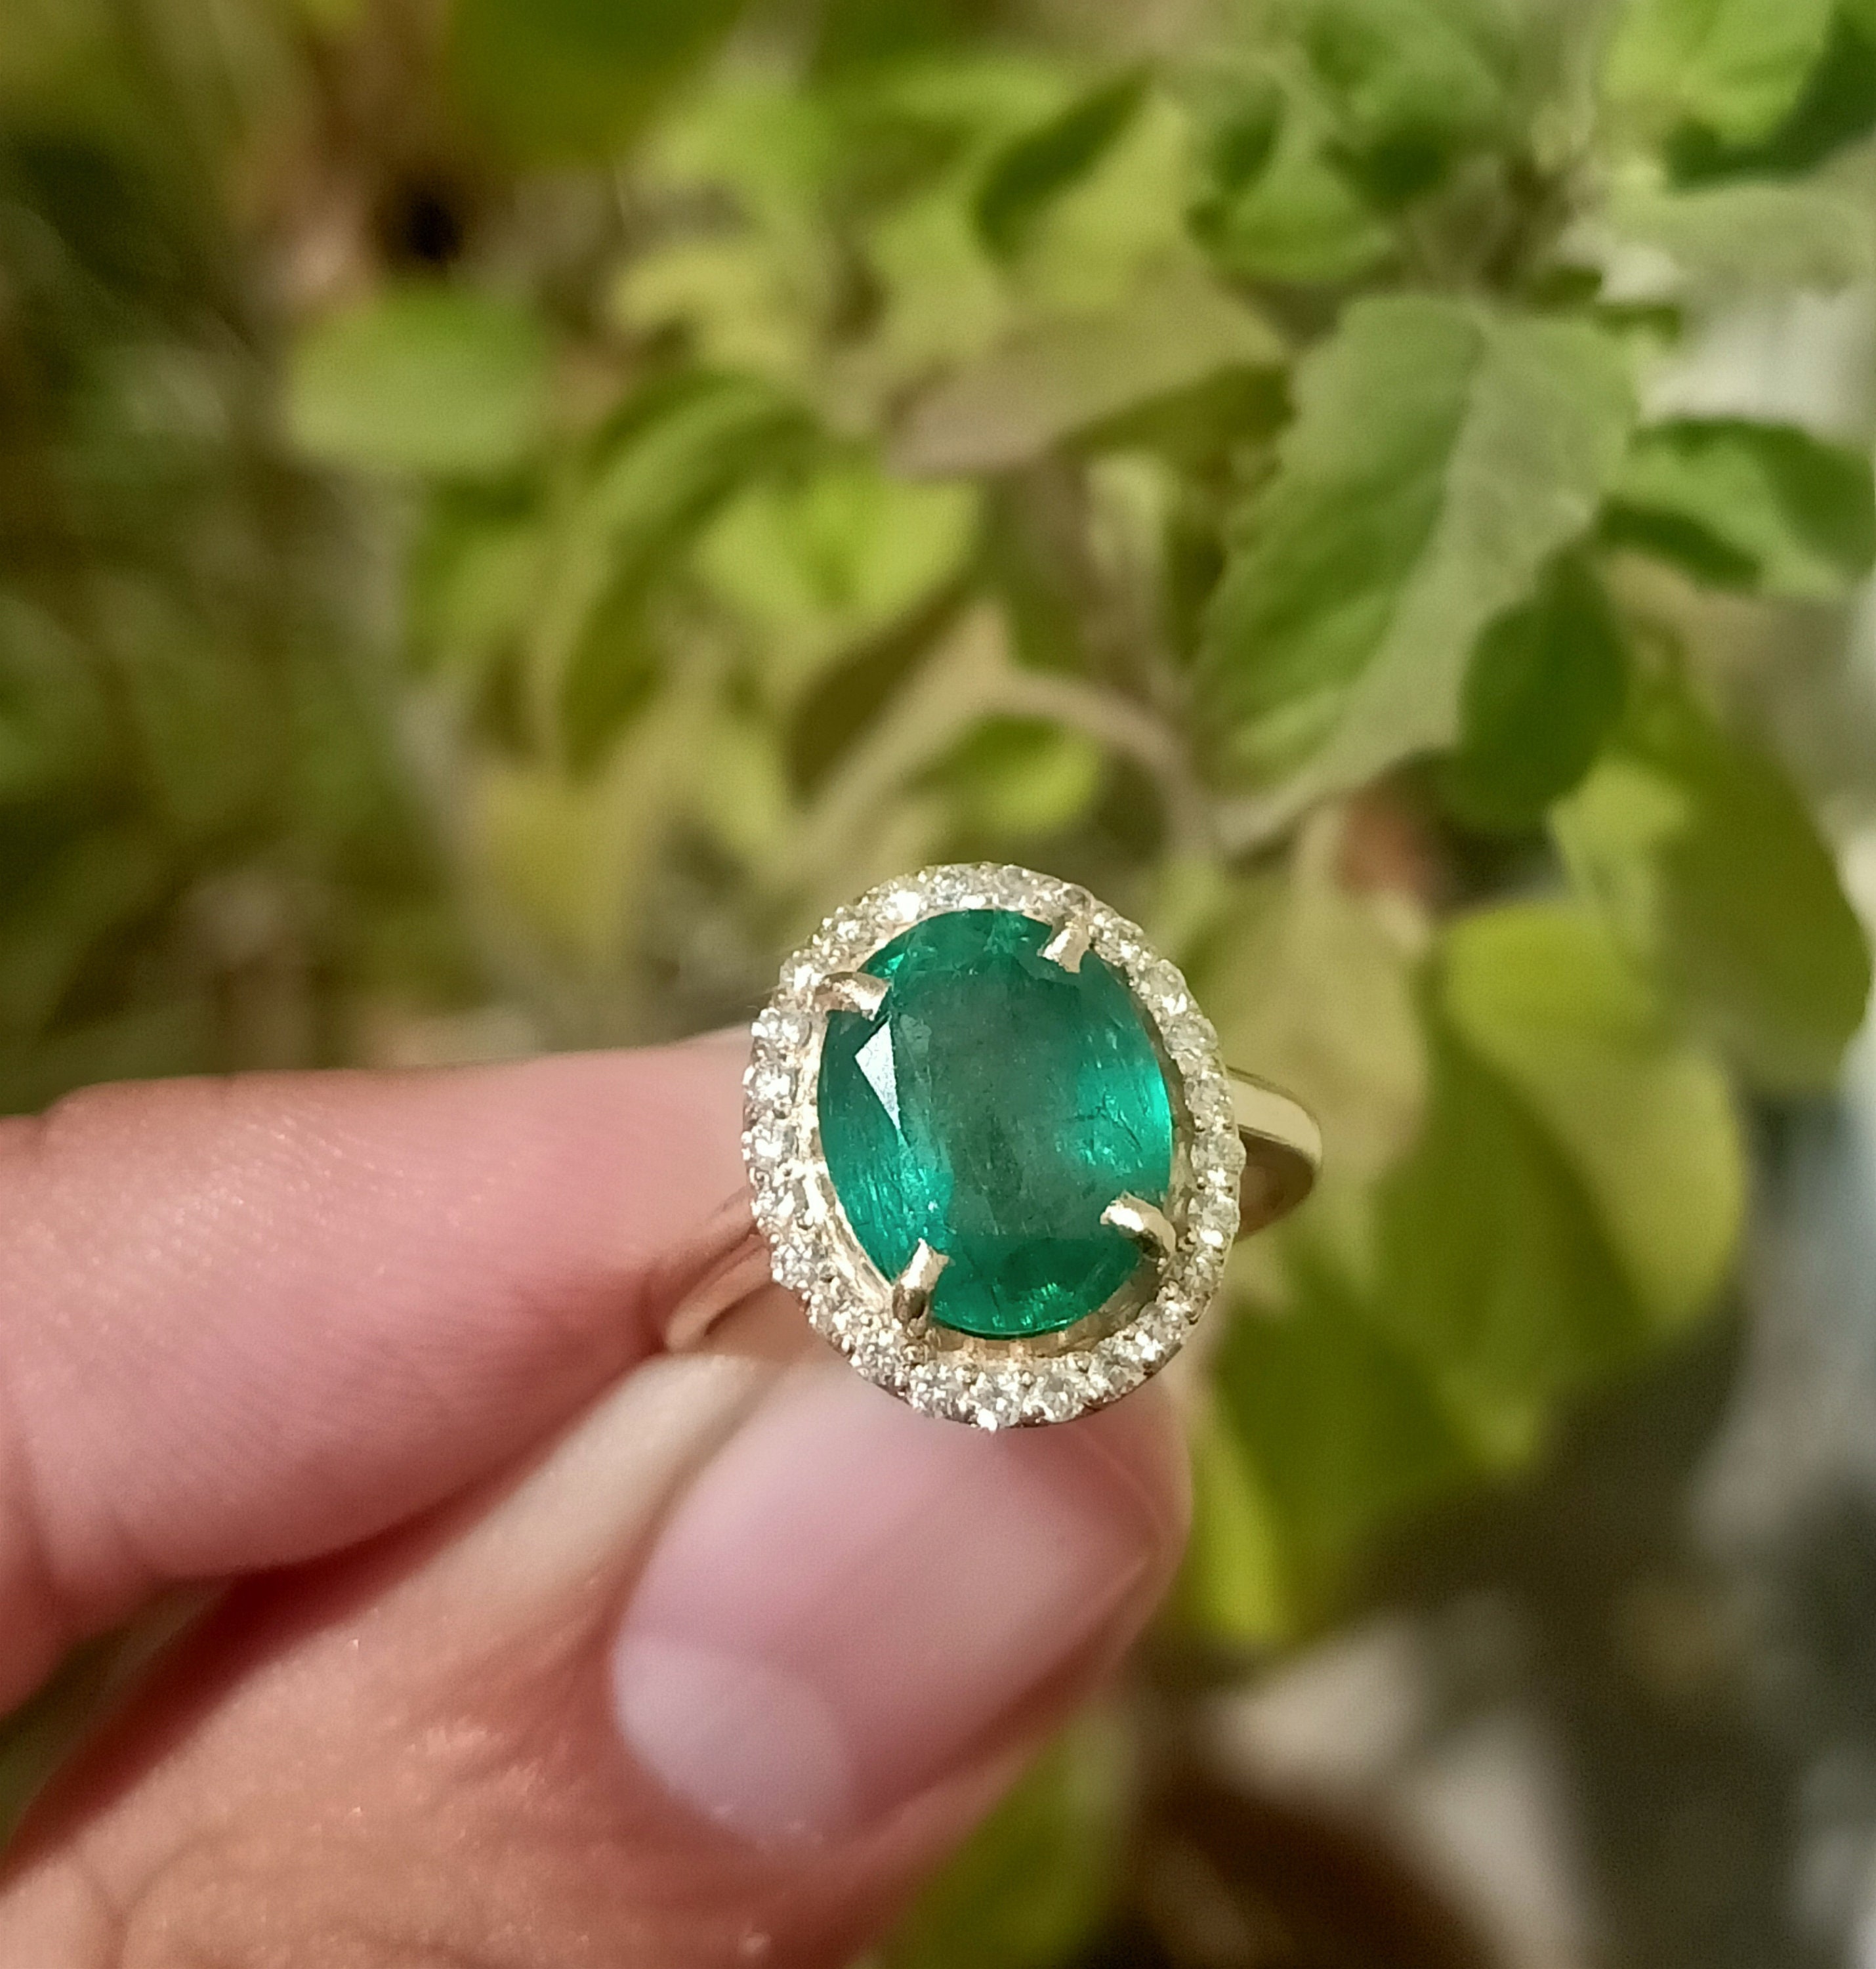 Deep Vivid Fancy Emerald Green Synthetic Corundum Oval Stone High Quality  Stone Sterling Silver 925 Men Ring All Sizes Jewelry - Etsy